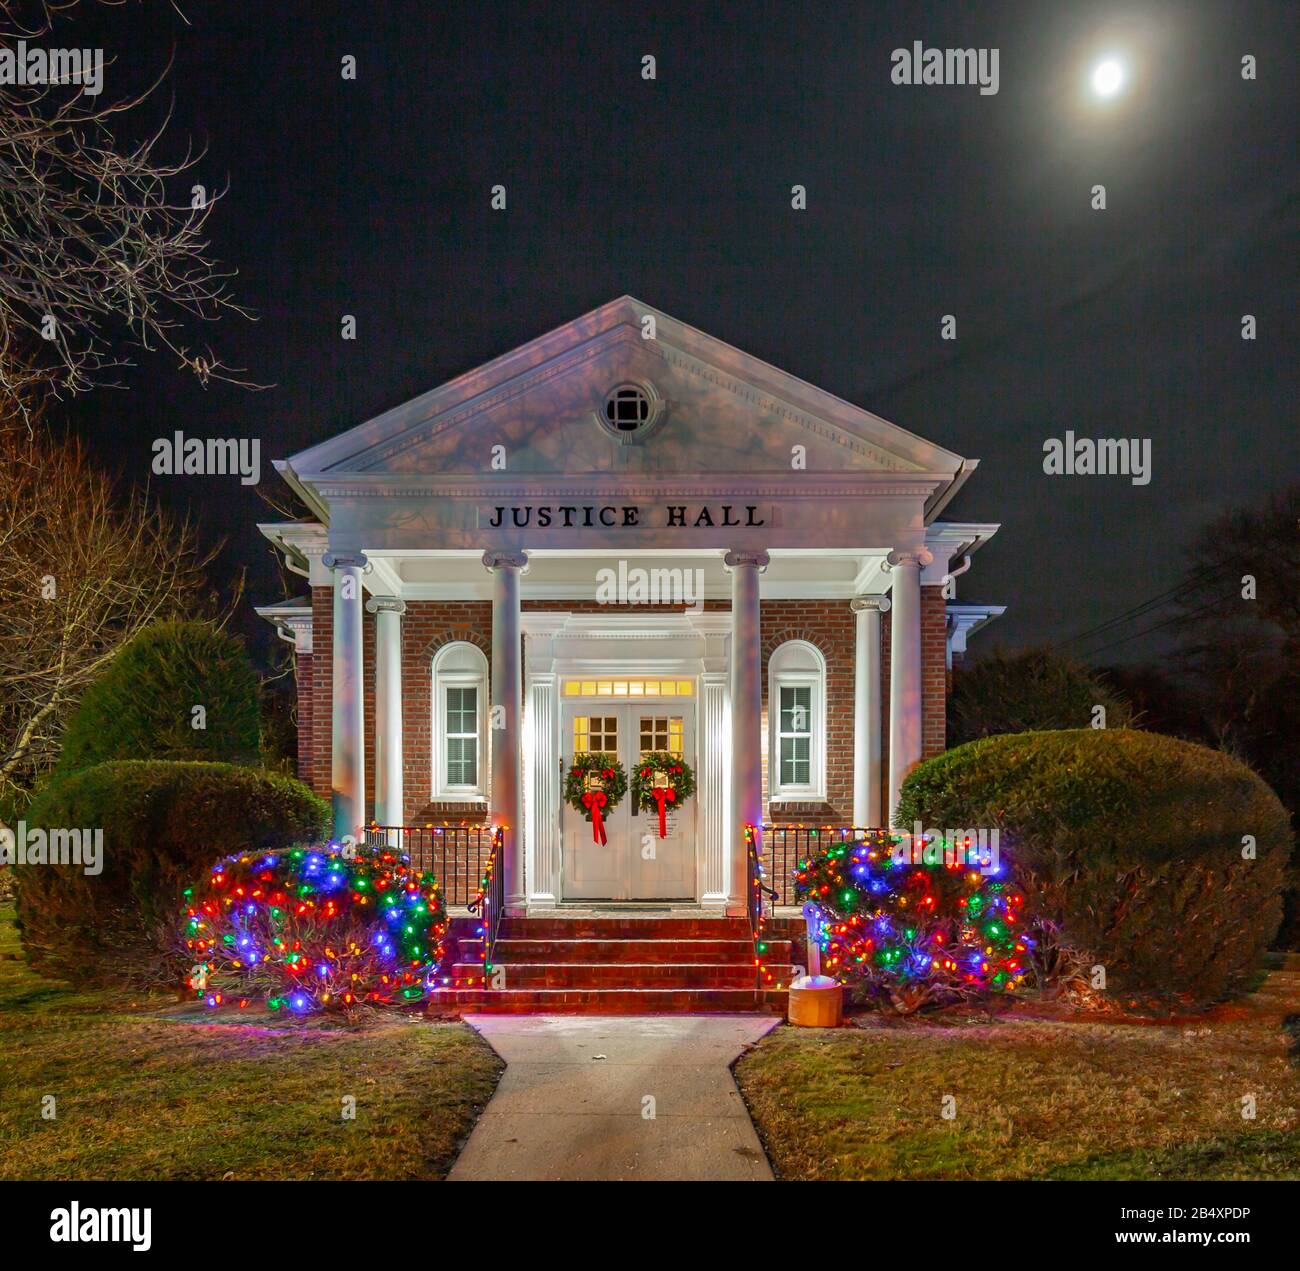 Justice Hall decorated for Christmas at night, Shelter Island, NY Stock Photo